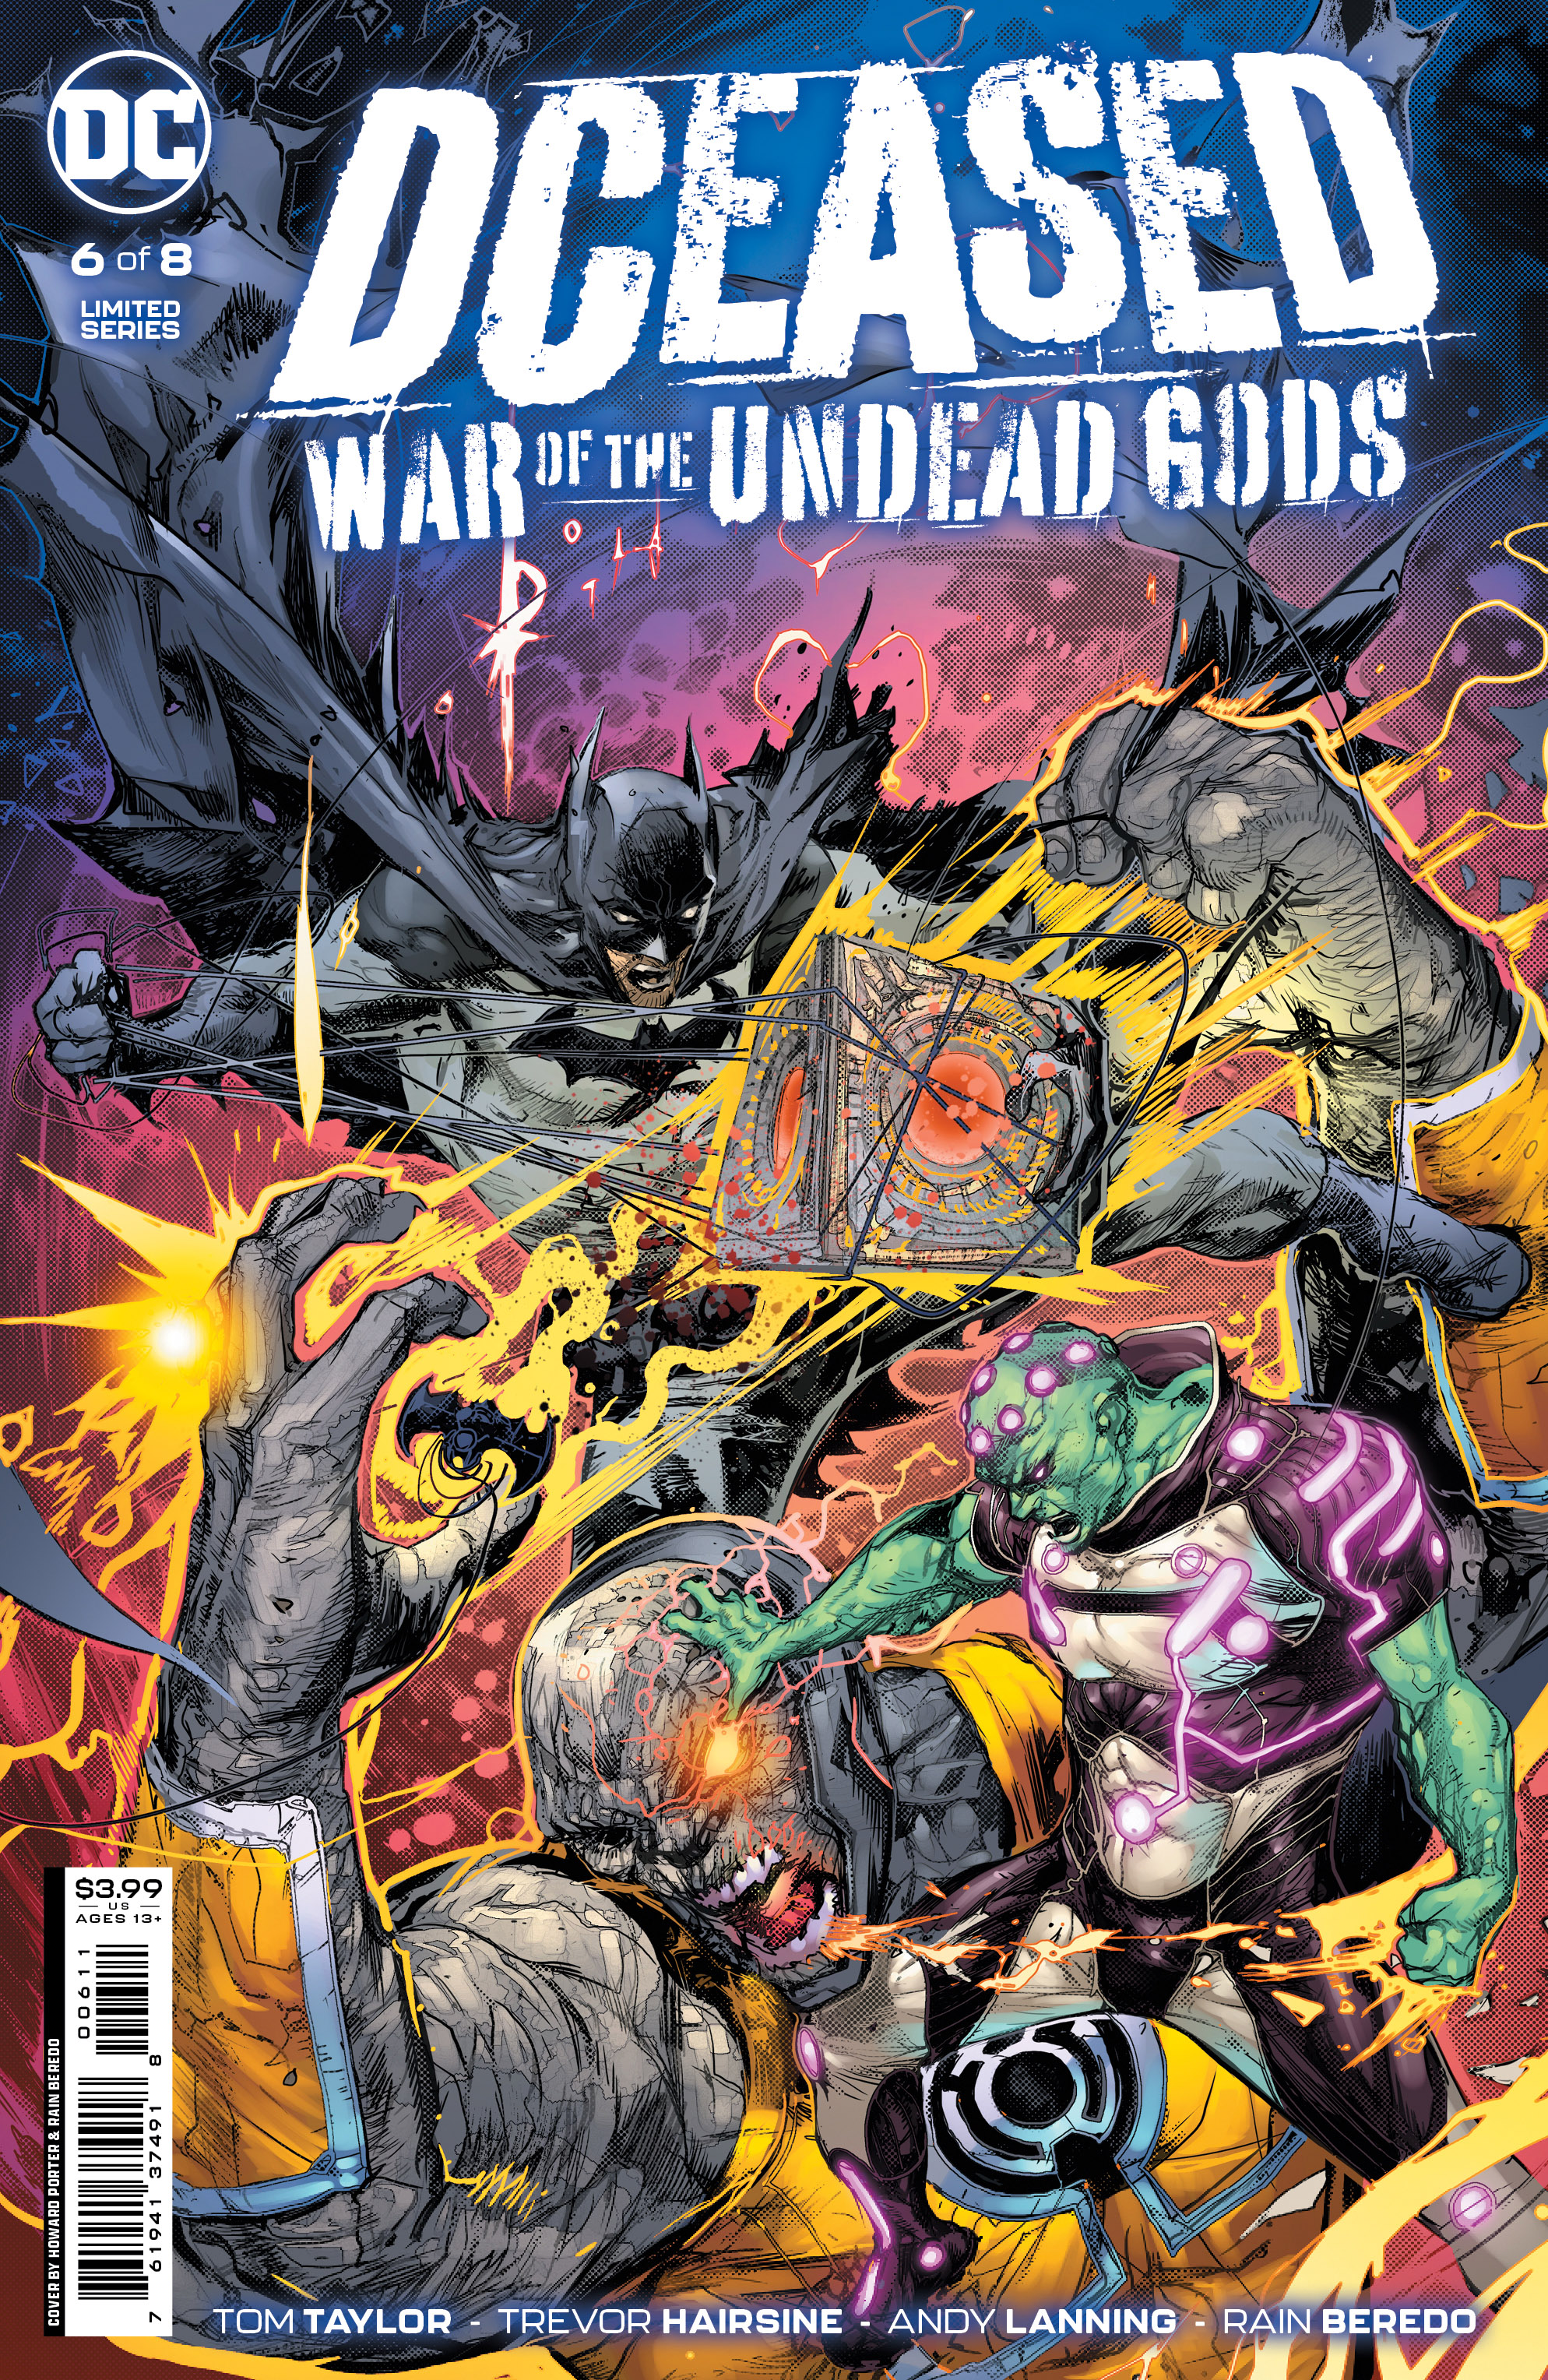 DCeased War of the Undead Gods #6 Cover A Howard Porter (Of 8)